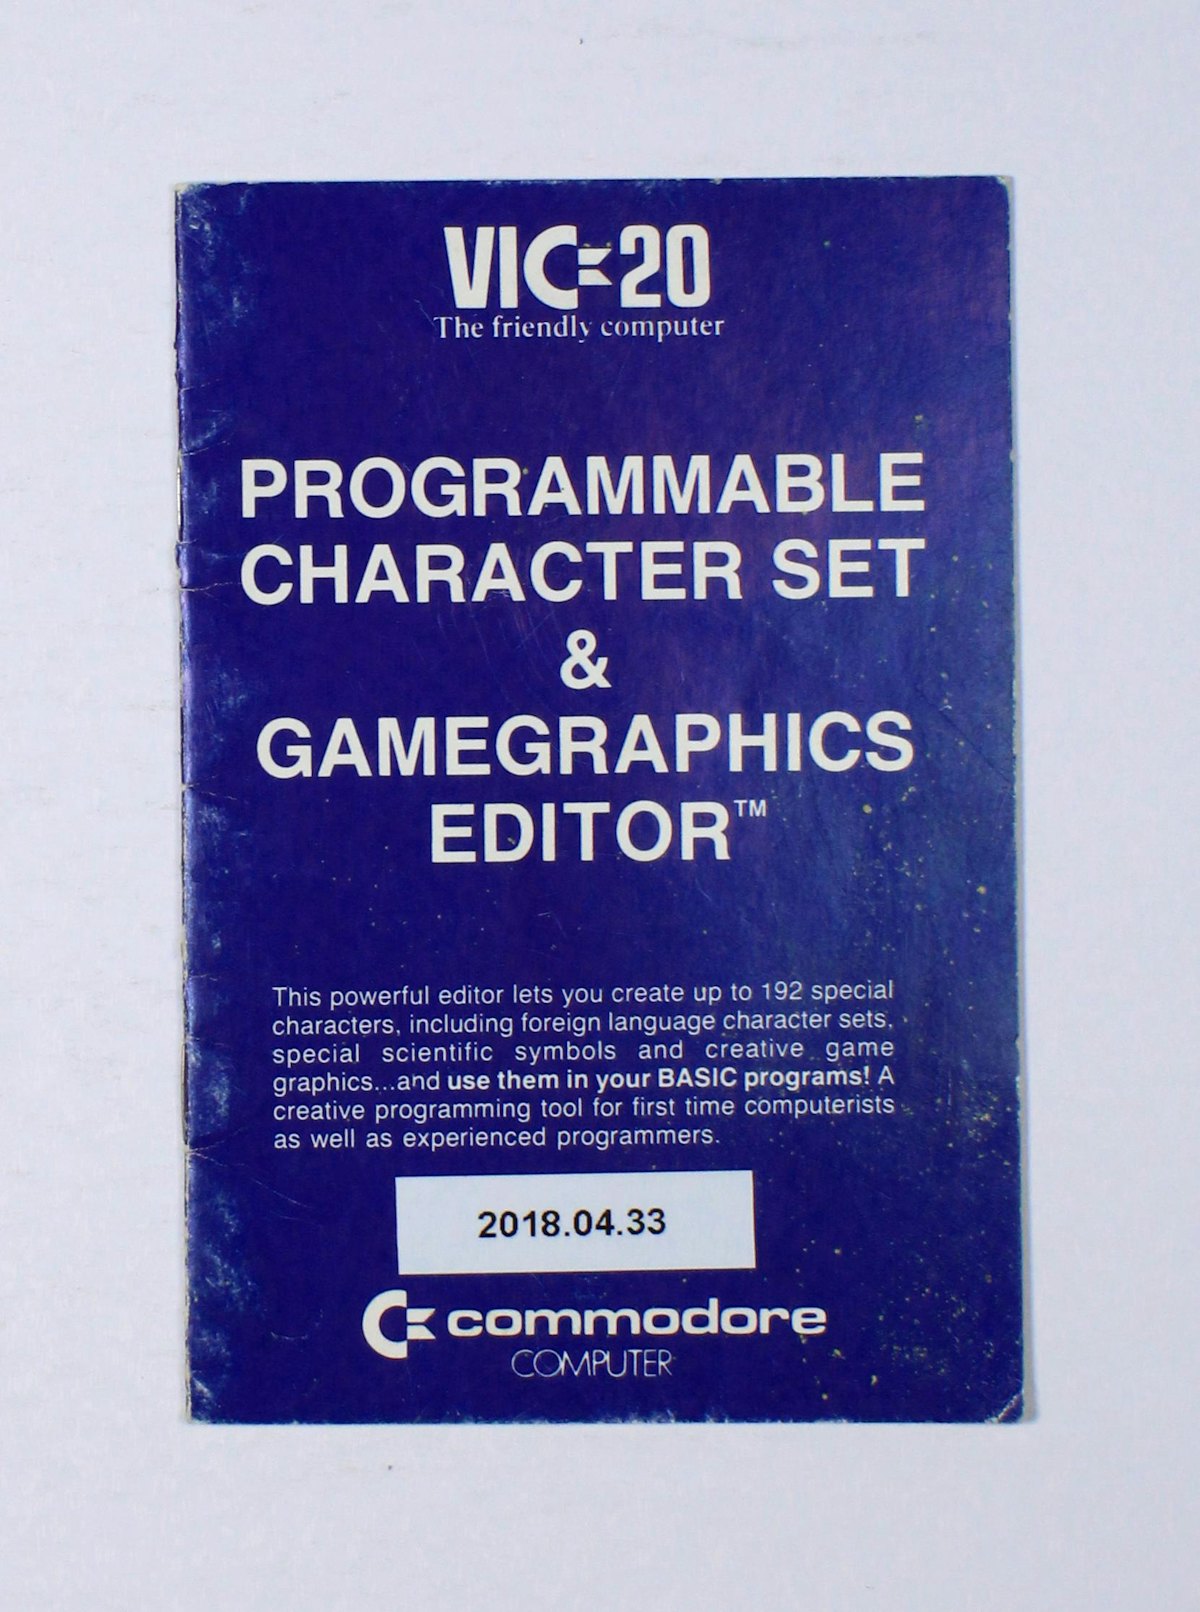 VIC-20 Programmable Character Set & Gamegraphics Editor